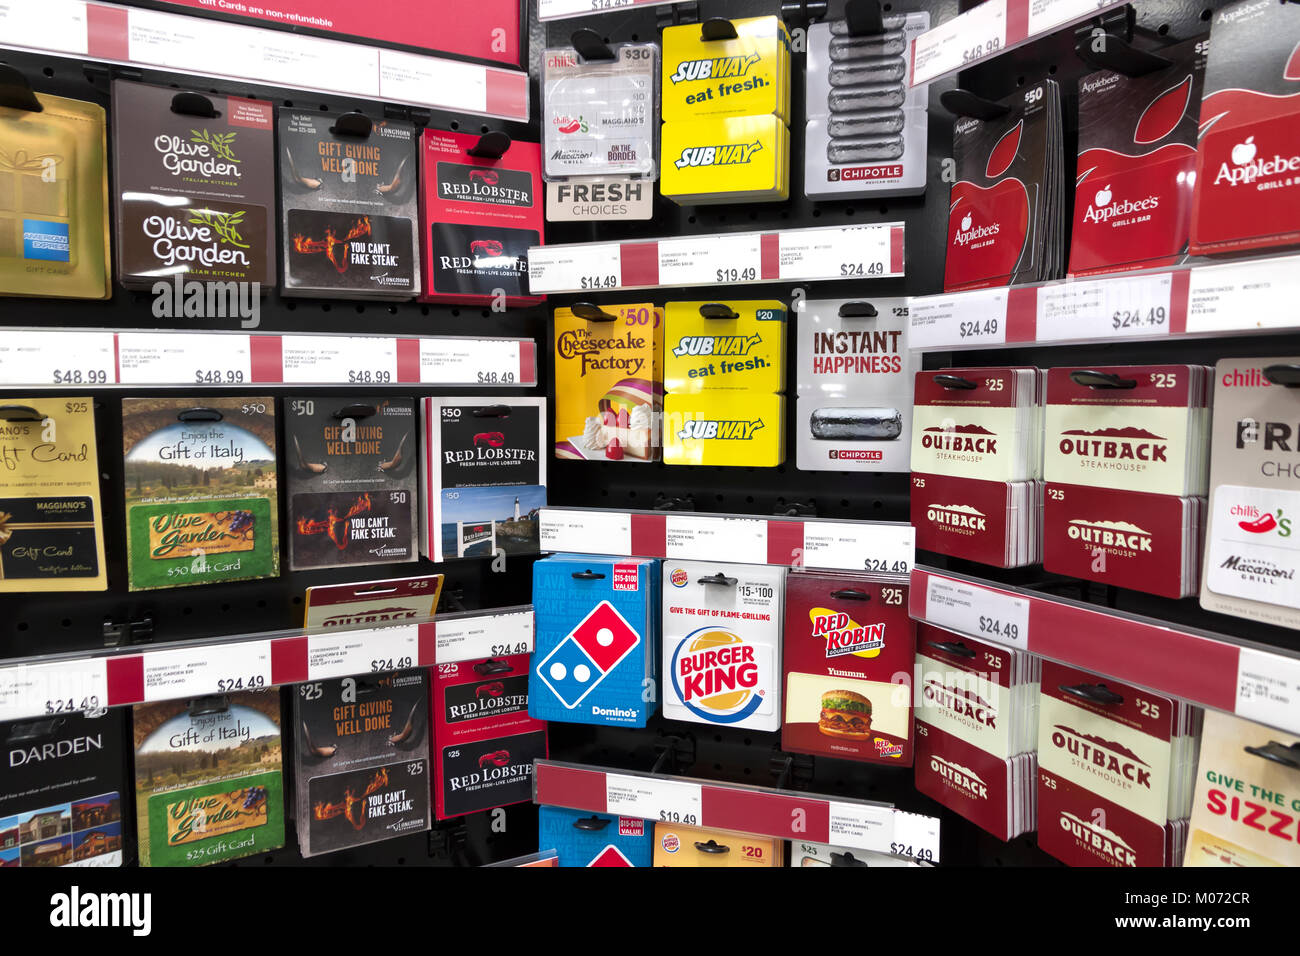 Restaurant gift cards for sale on a store display. Stock Photo